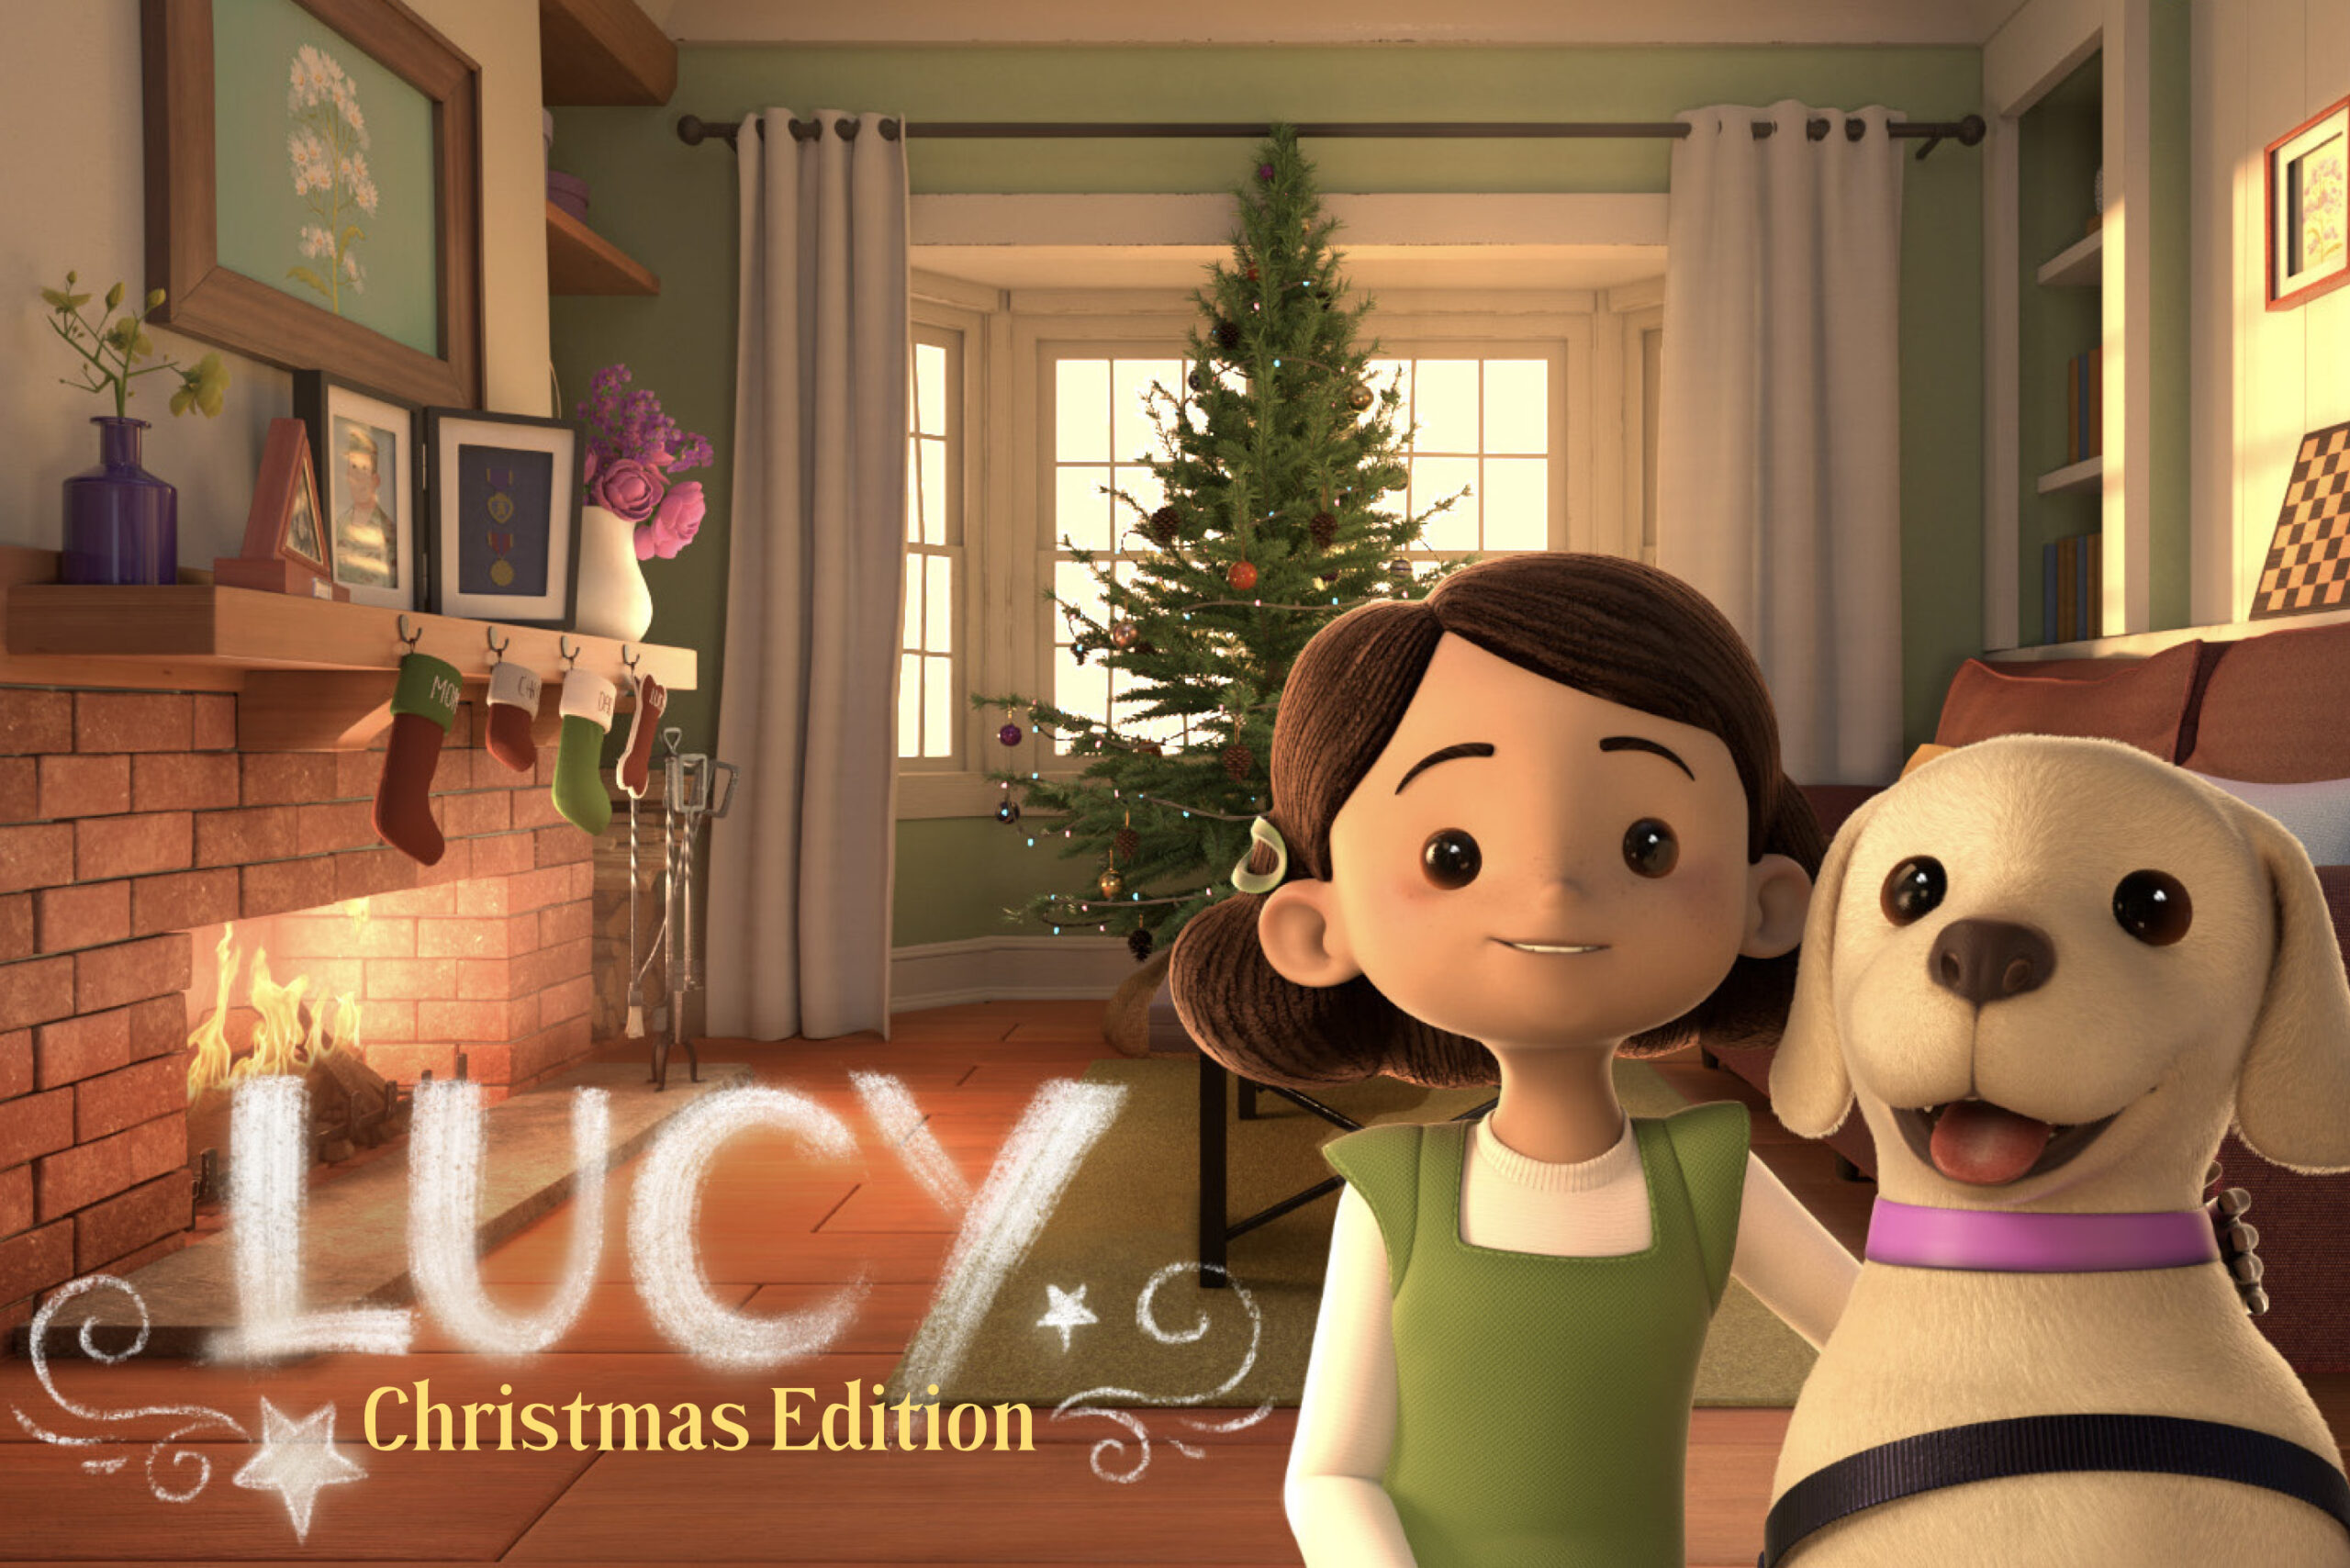 "Lucy Christmas Edition" text pictured with an animated girl and yellow lab.